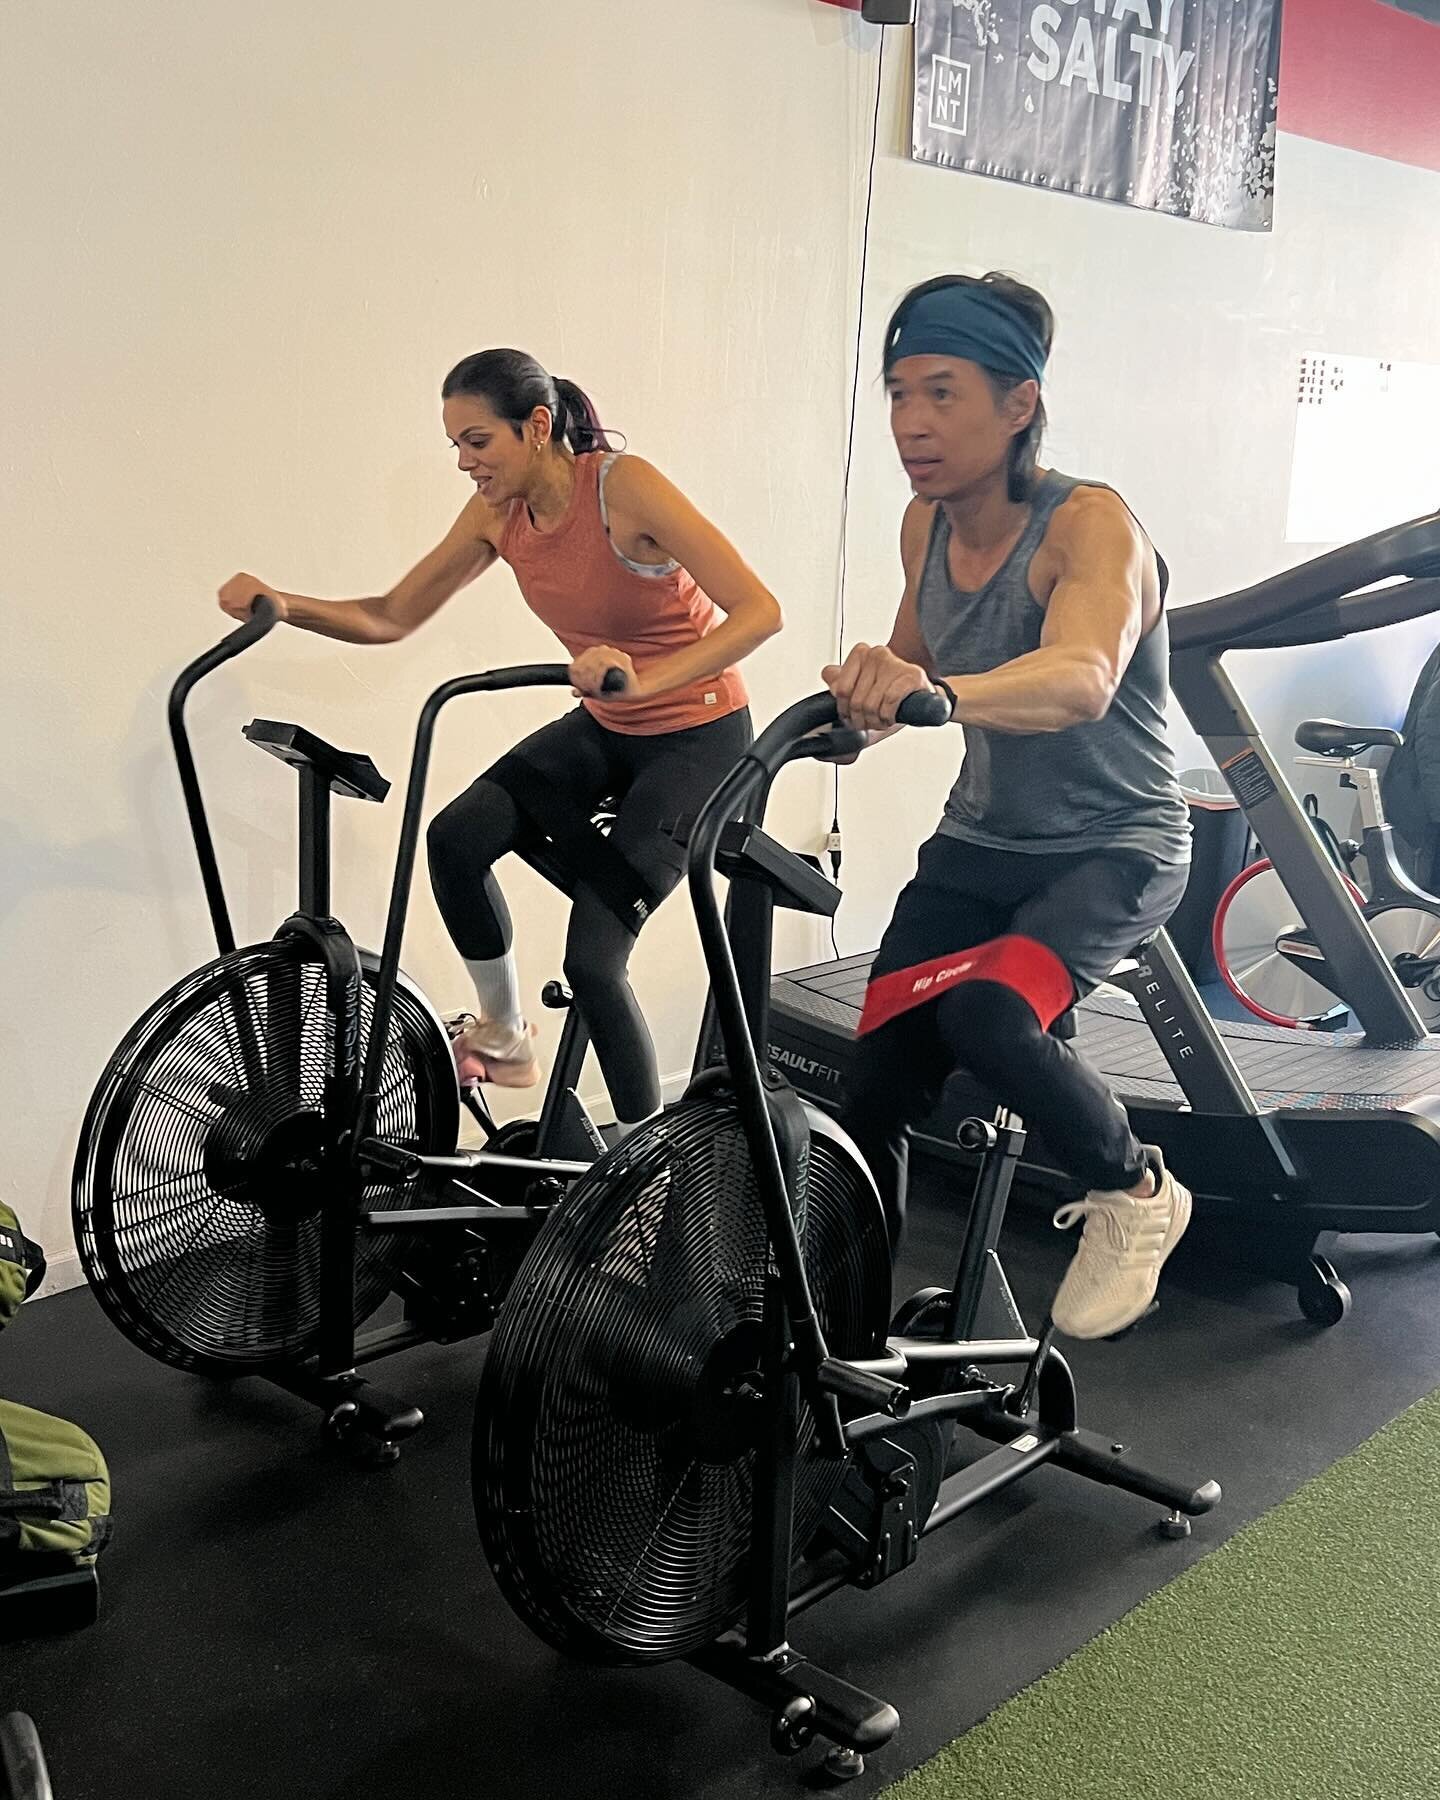 Thank you COUPLES for spending your Valentine&rsquo;s Day with us! No better way to SHARE the LOVE of FITNESS than with those you love most &hearts;️. 
.
Happy Valentines Day everyone!

#couplesthattraintogether #strongcouples #liftingcouplesdoitbett